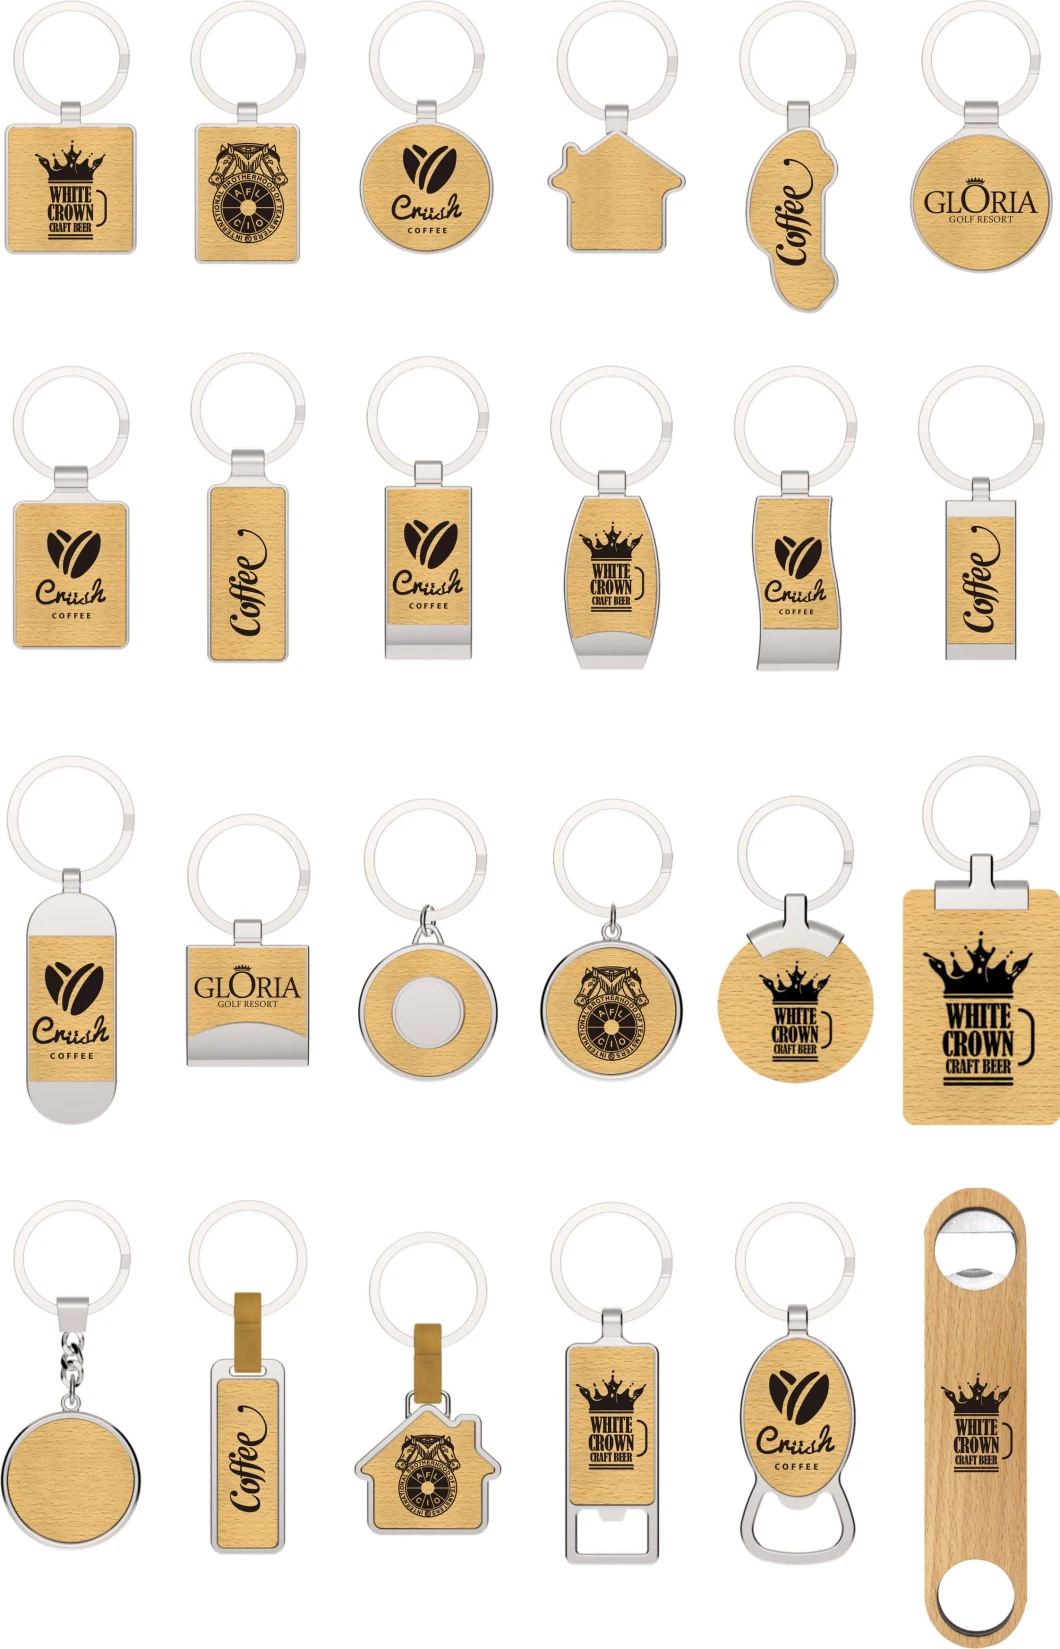 Free Samples Wooden Bottle Opener Keychain Logo Can Be Printed